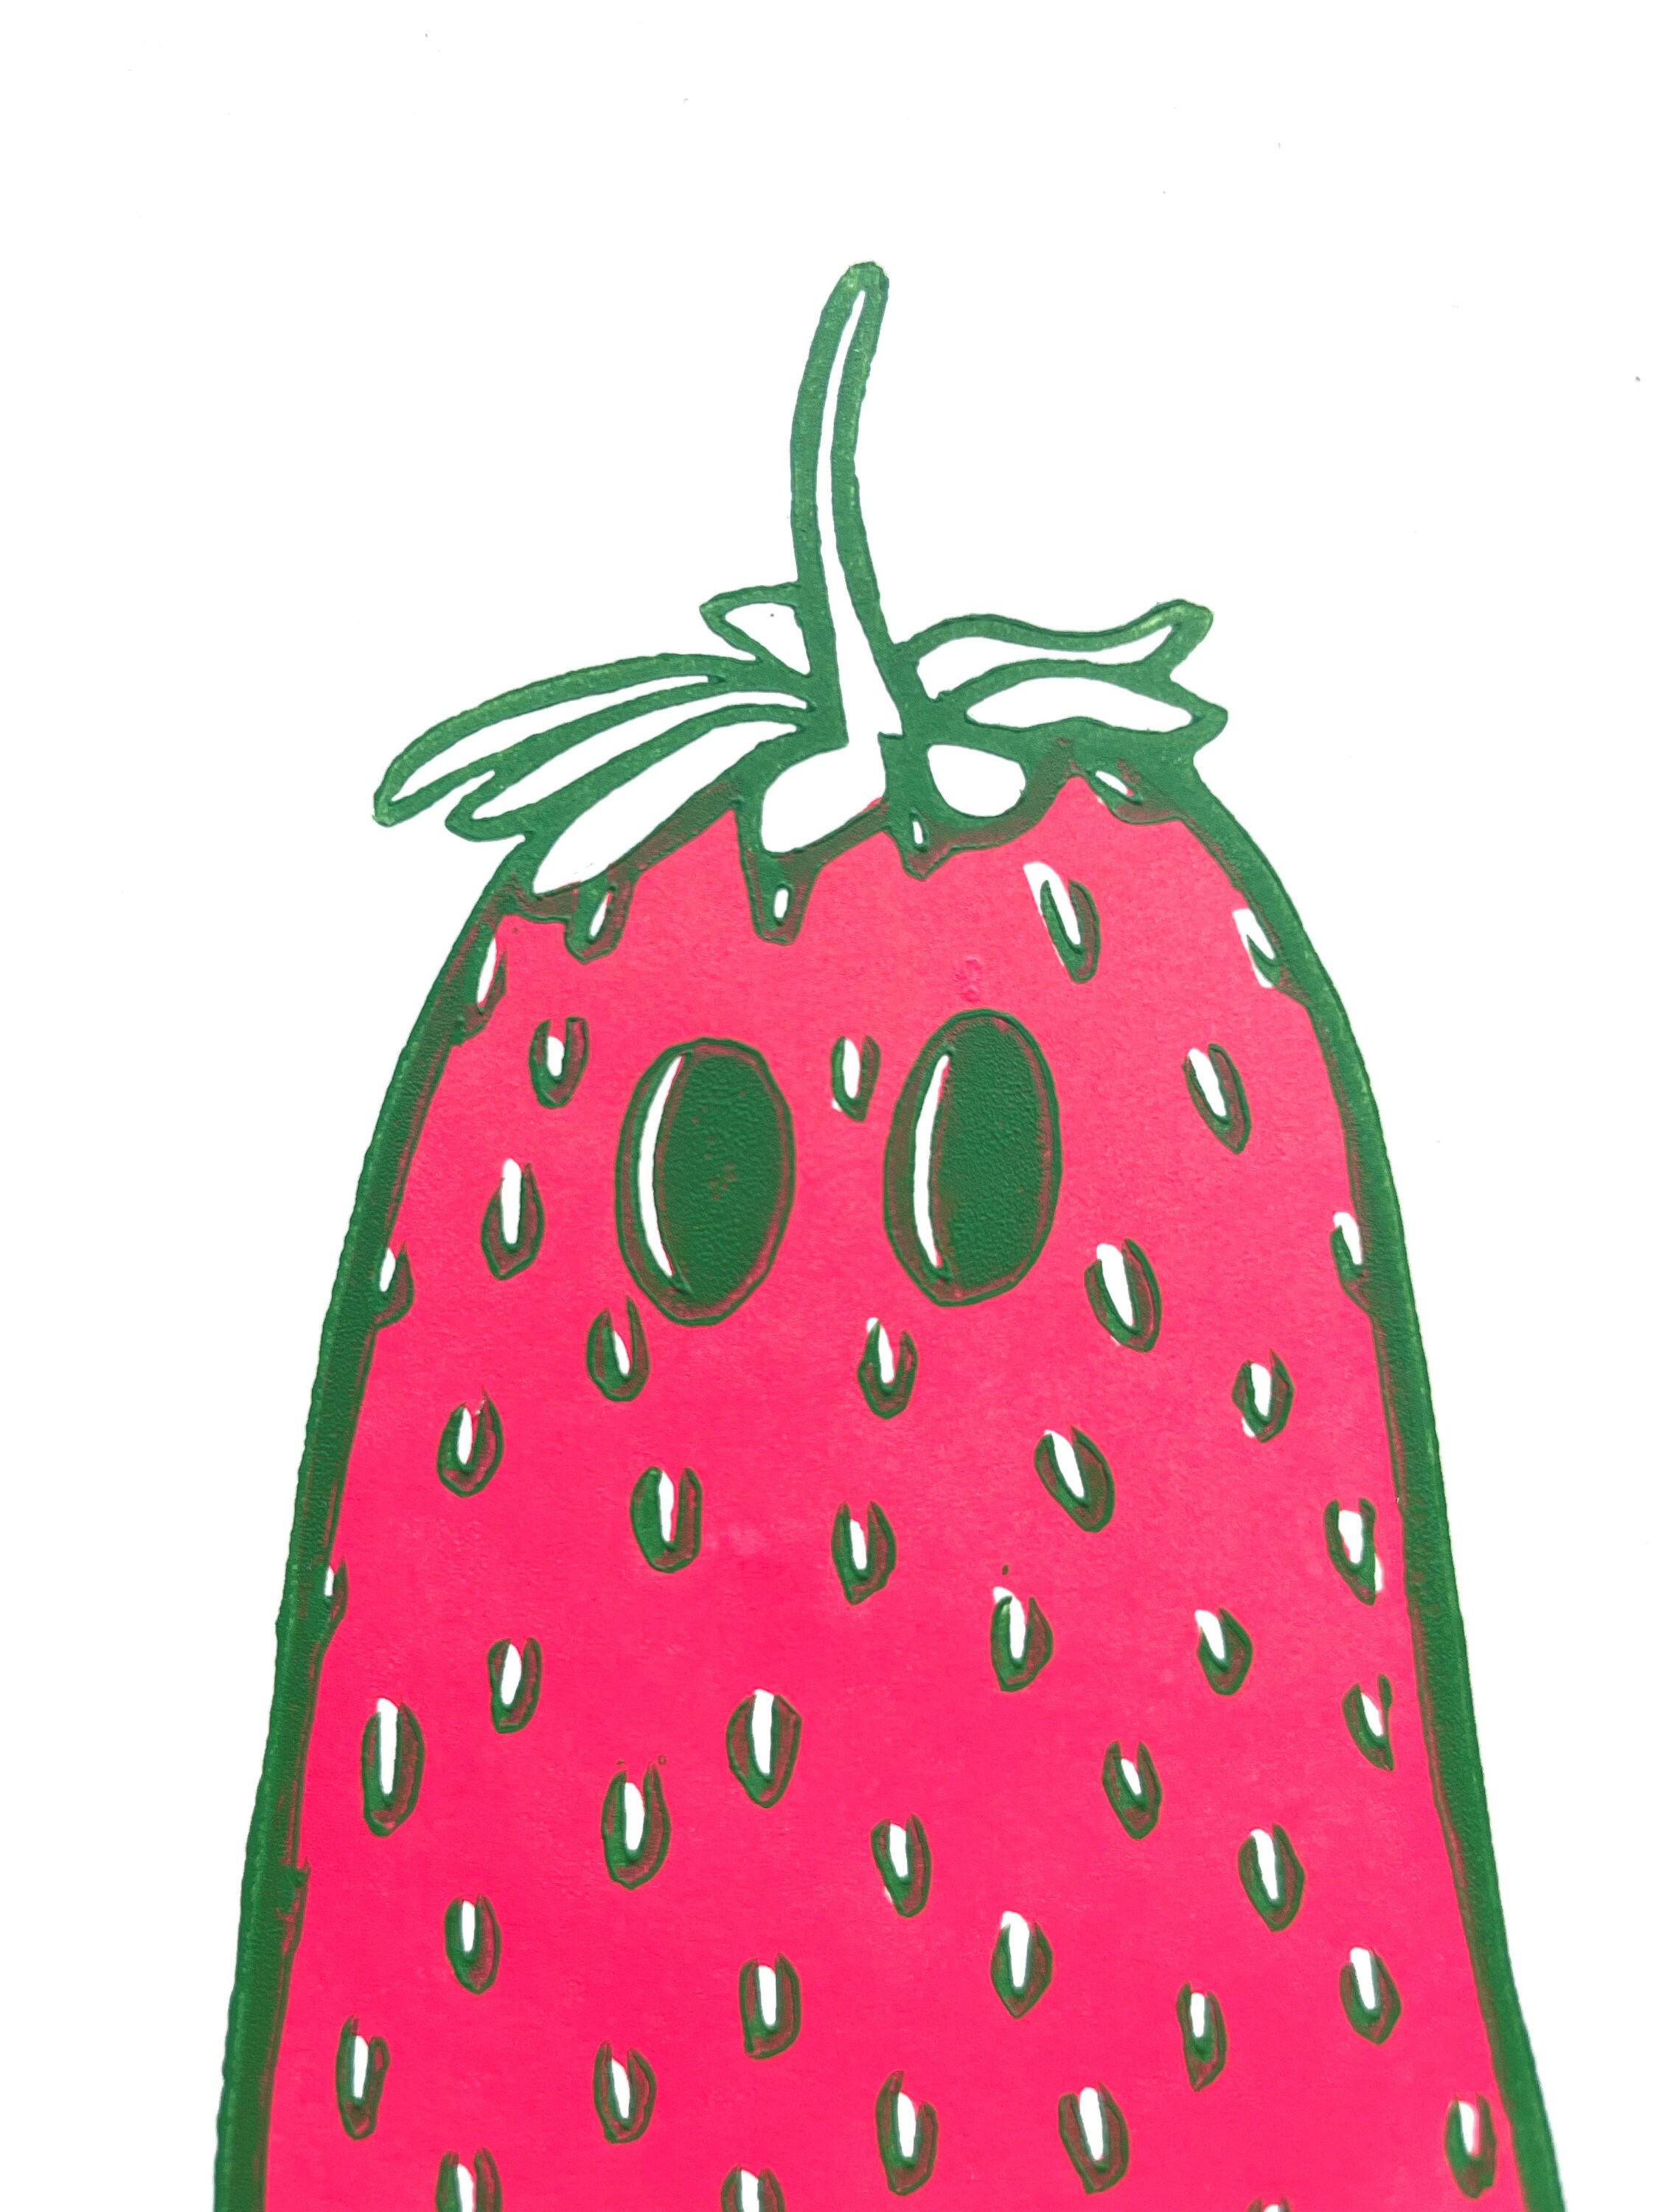 Drawing of Strawberry by Albanian girl - Drawize Gallery!